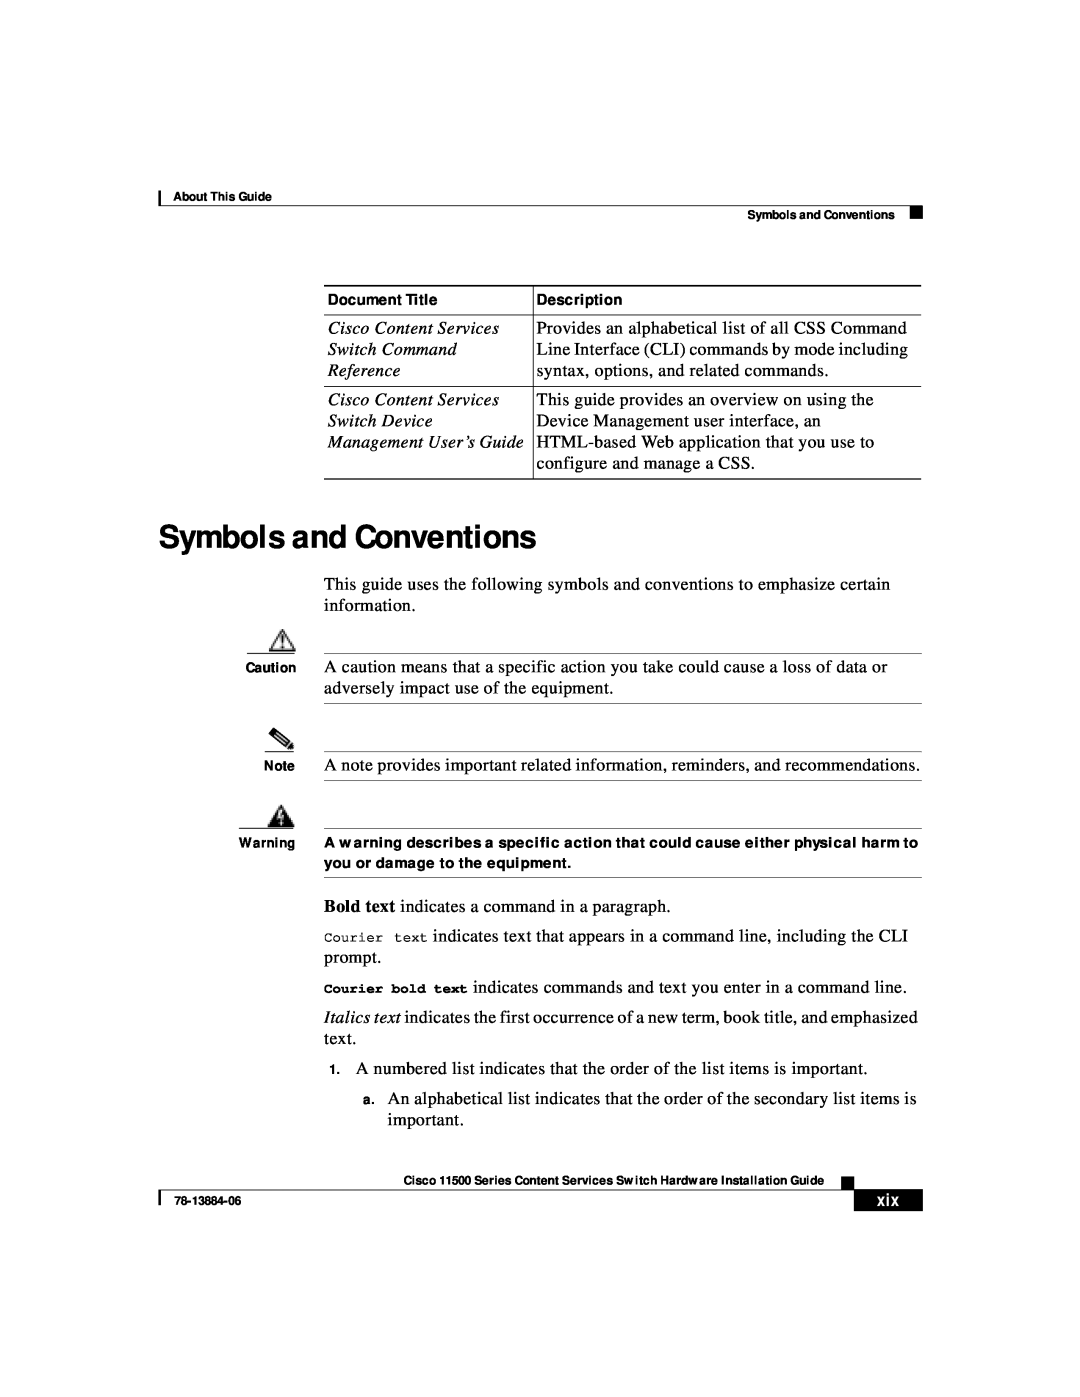 Cisco Systems 11500 Series manual Symbols and Conventions, Document Title, Description 